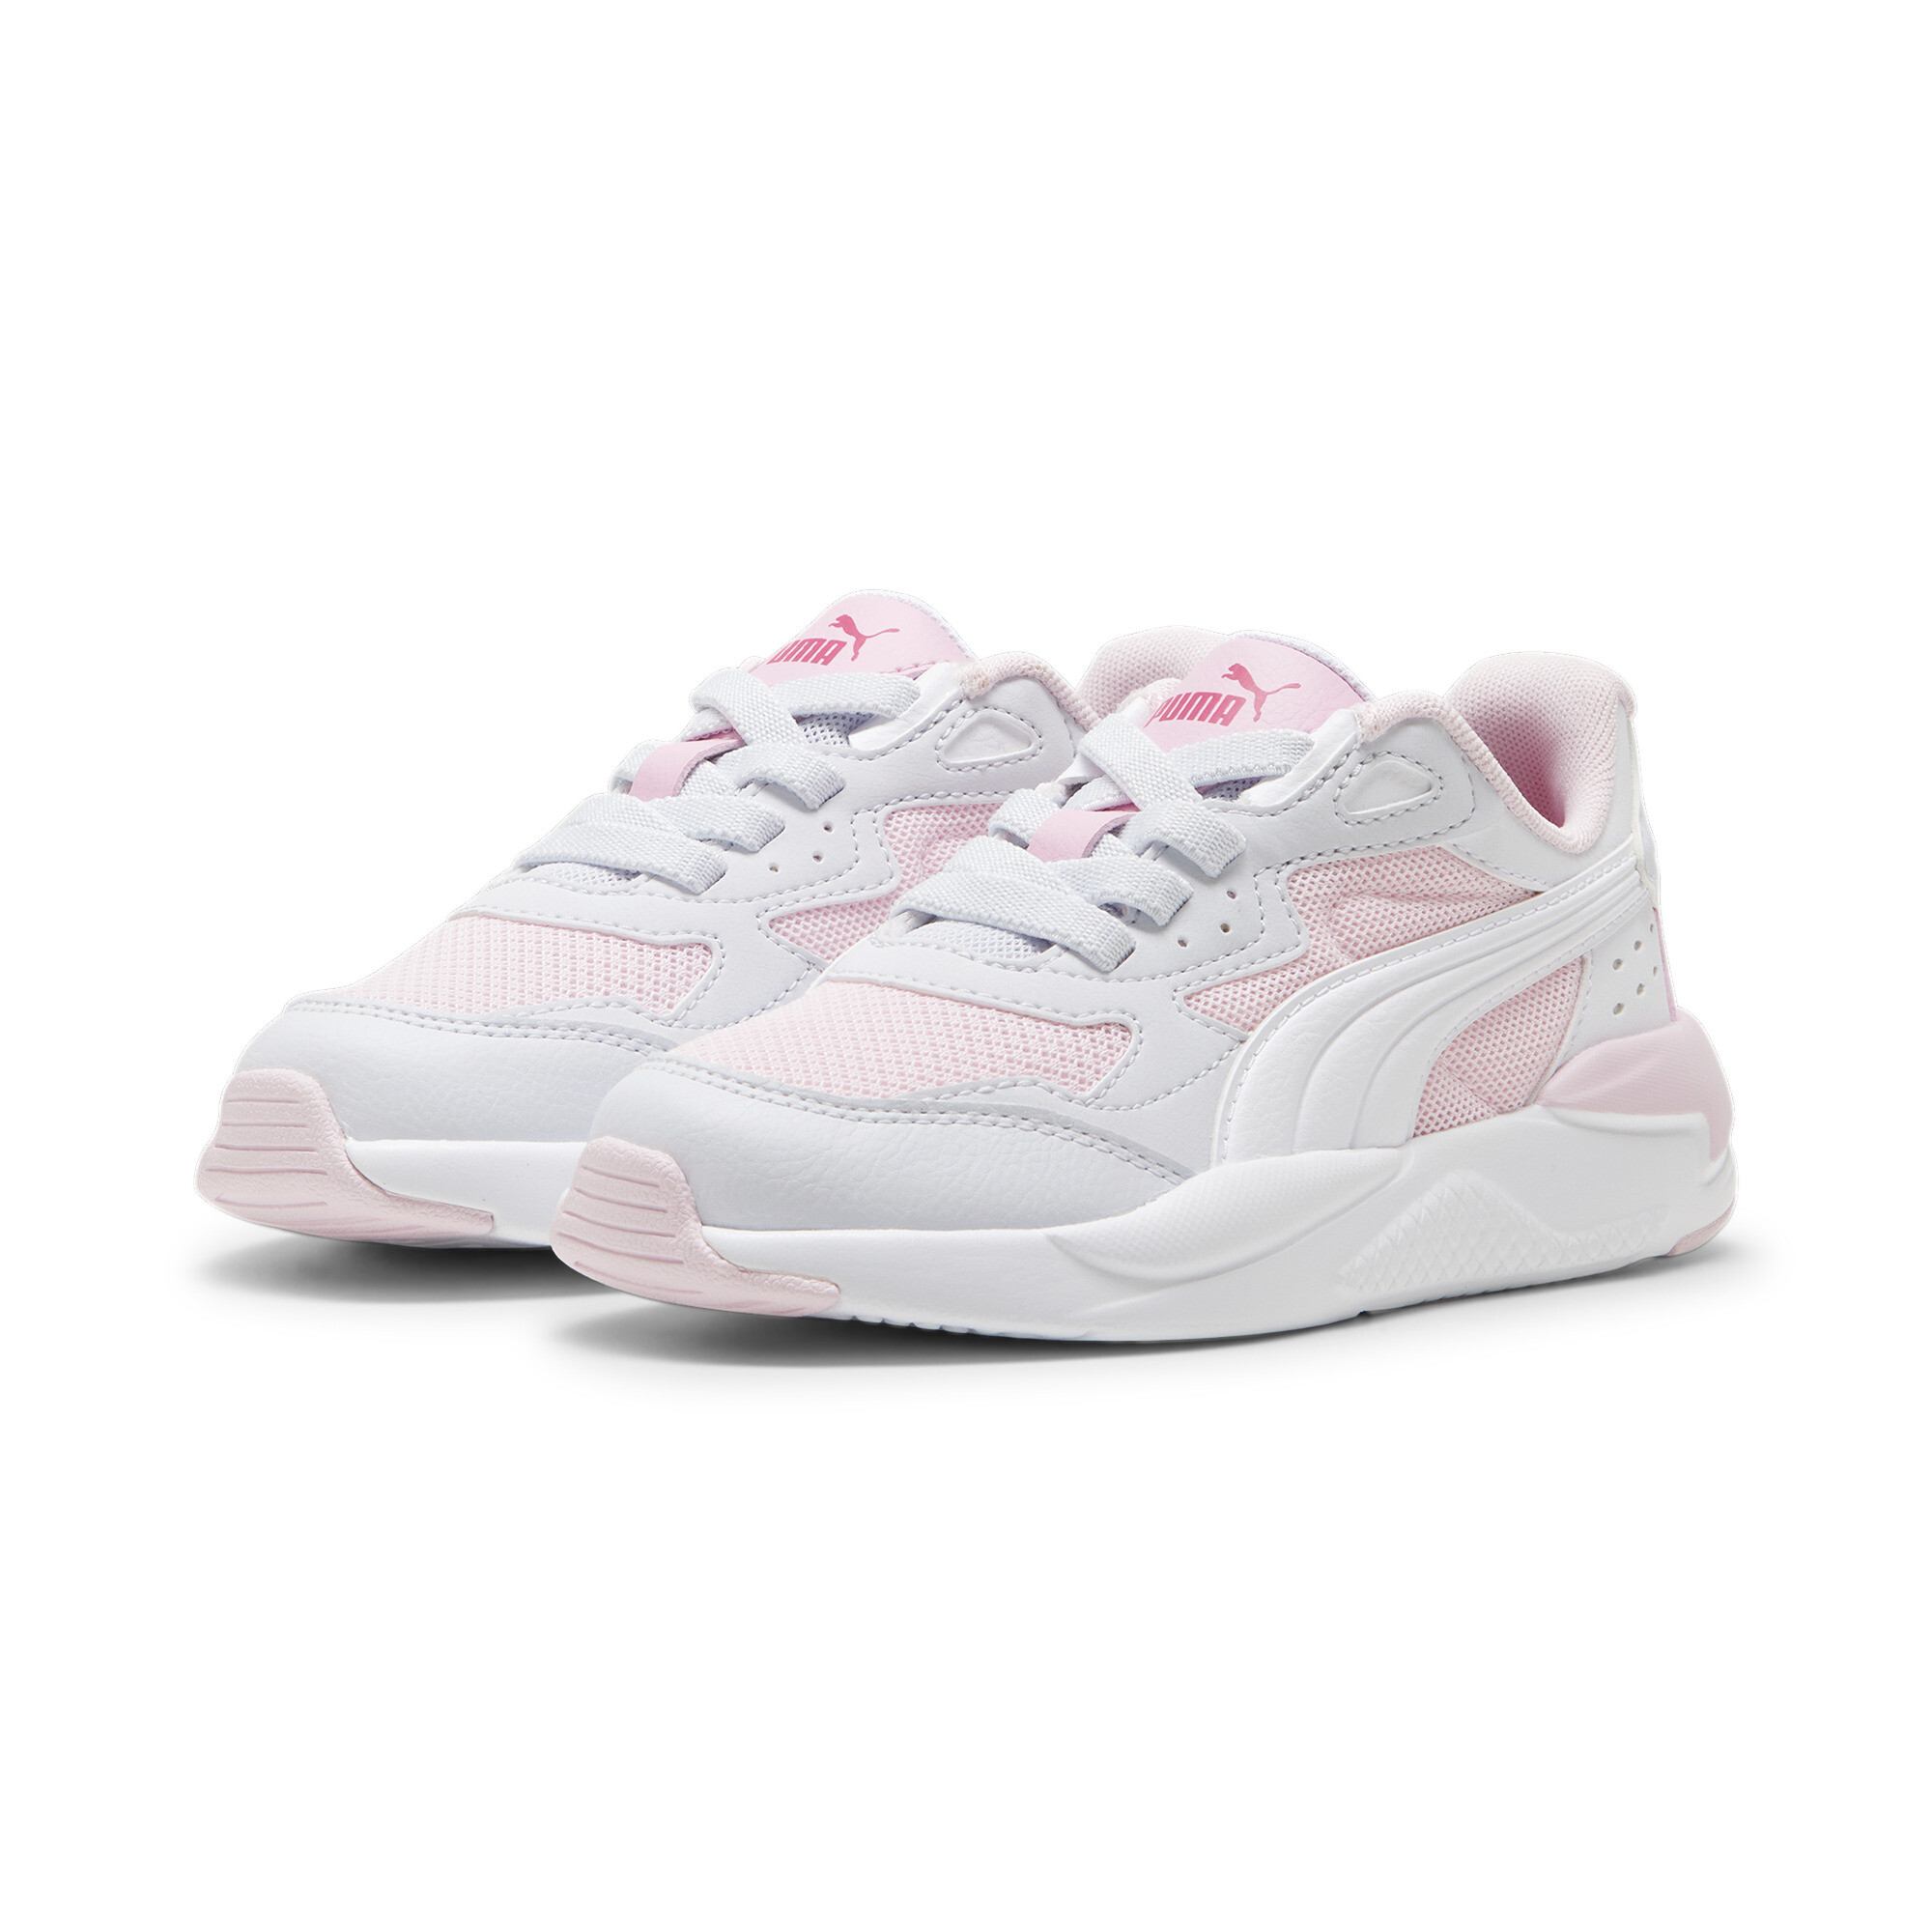 Puma X-Ray Speed AC Kids' Trainers, Pink, Size 31.5, Shoes